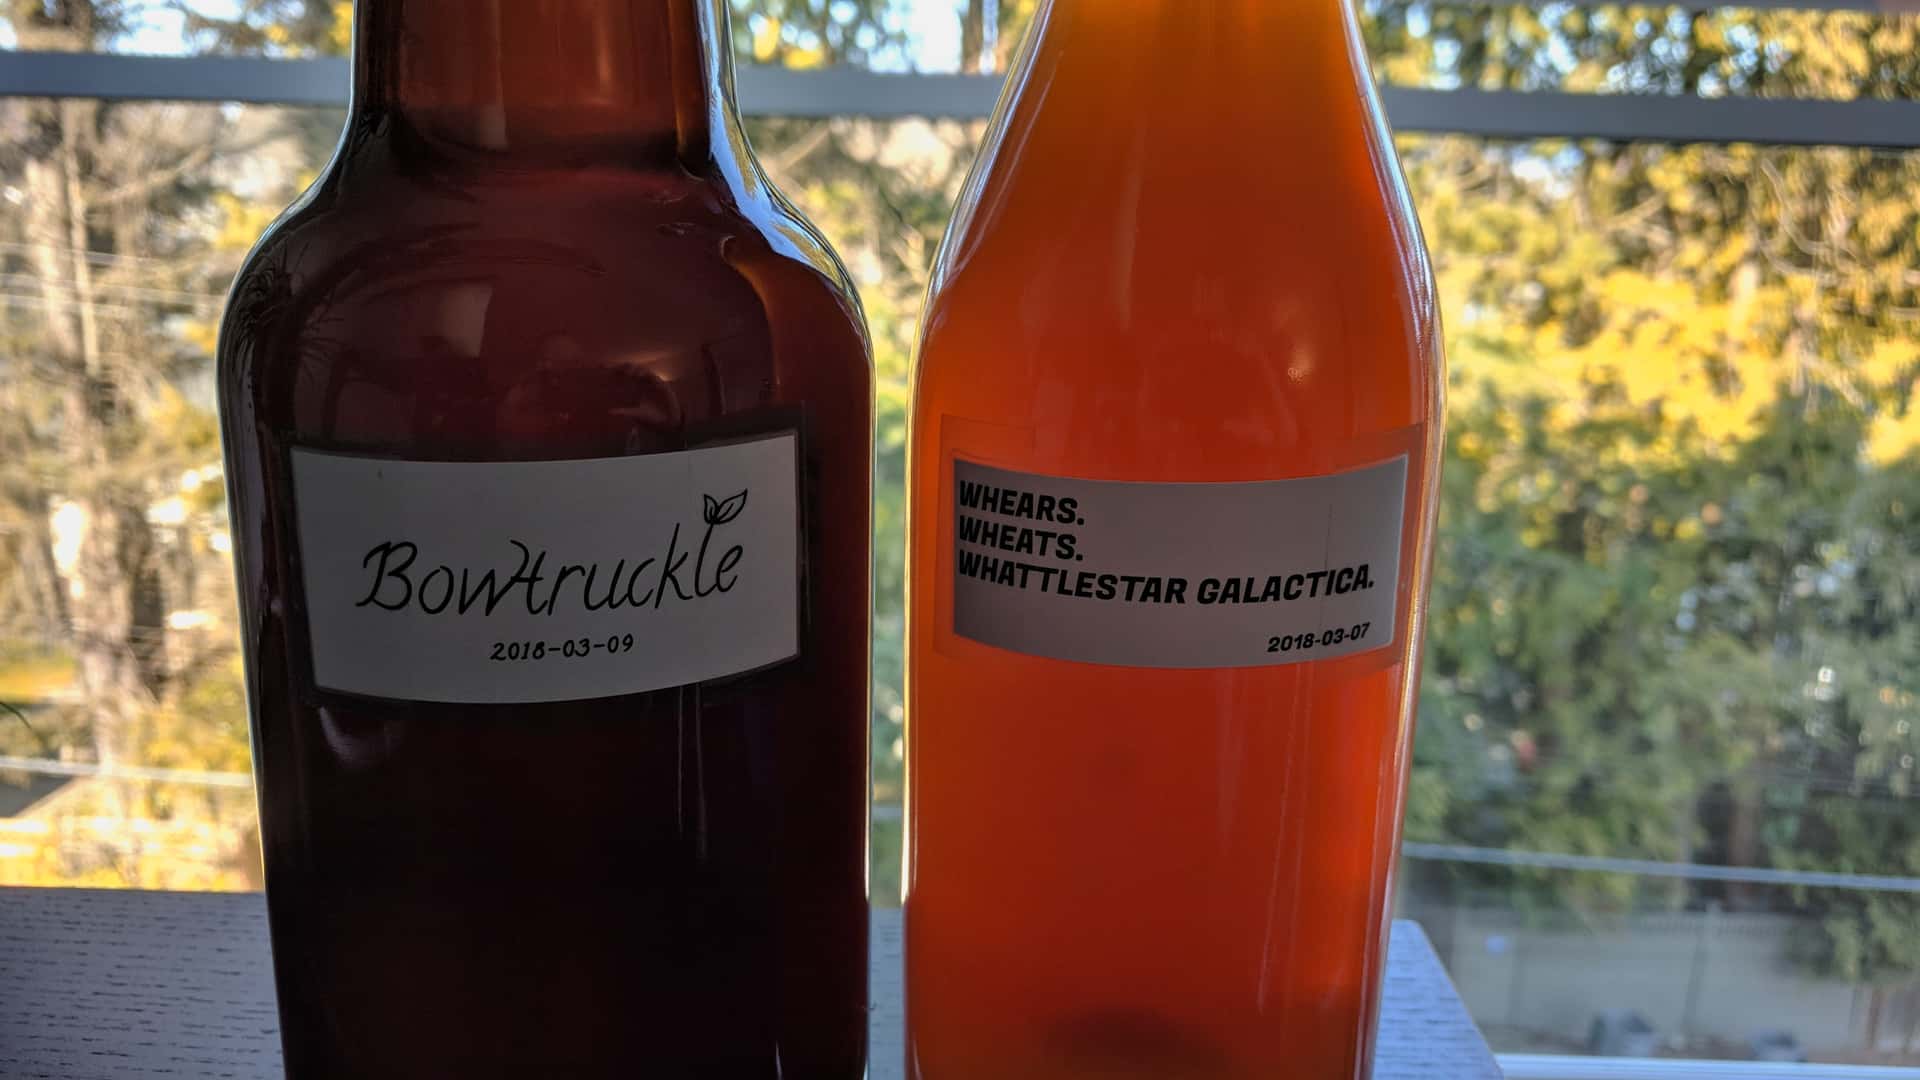 homebrew beer bottles labeled “Bowtruckle” and “Whears. Wheats. Whattlestar Galactica.”